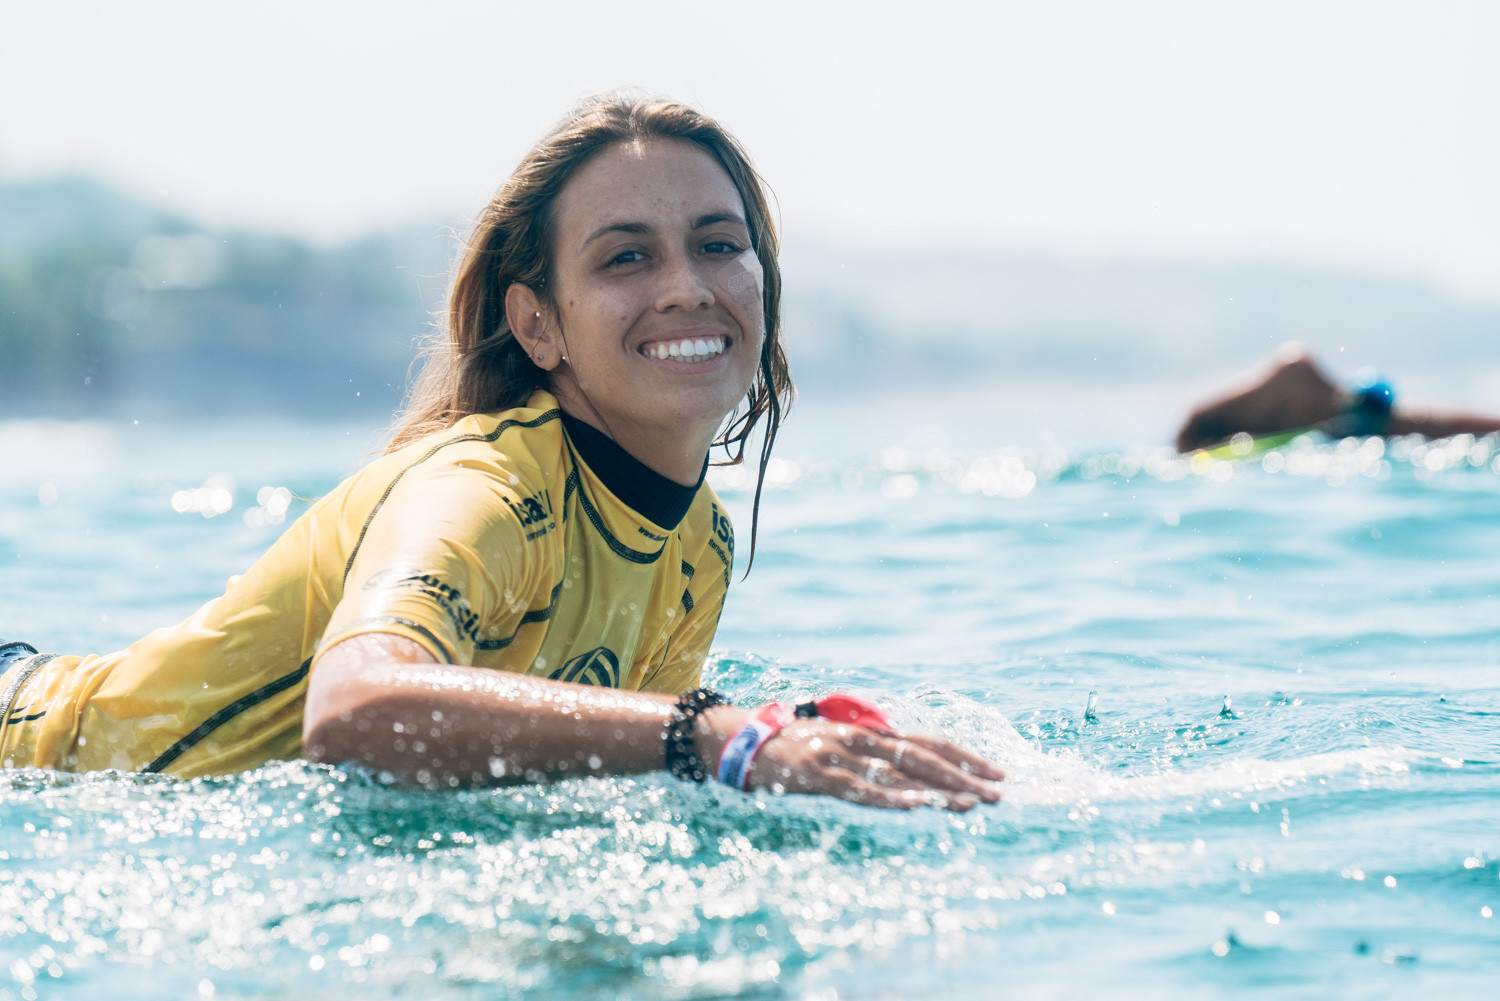 Chelsea Roett of Barbados is all smiles as she competes on the water ©ISA/Pablo Jimenez